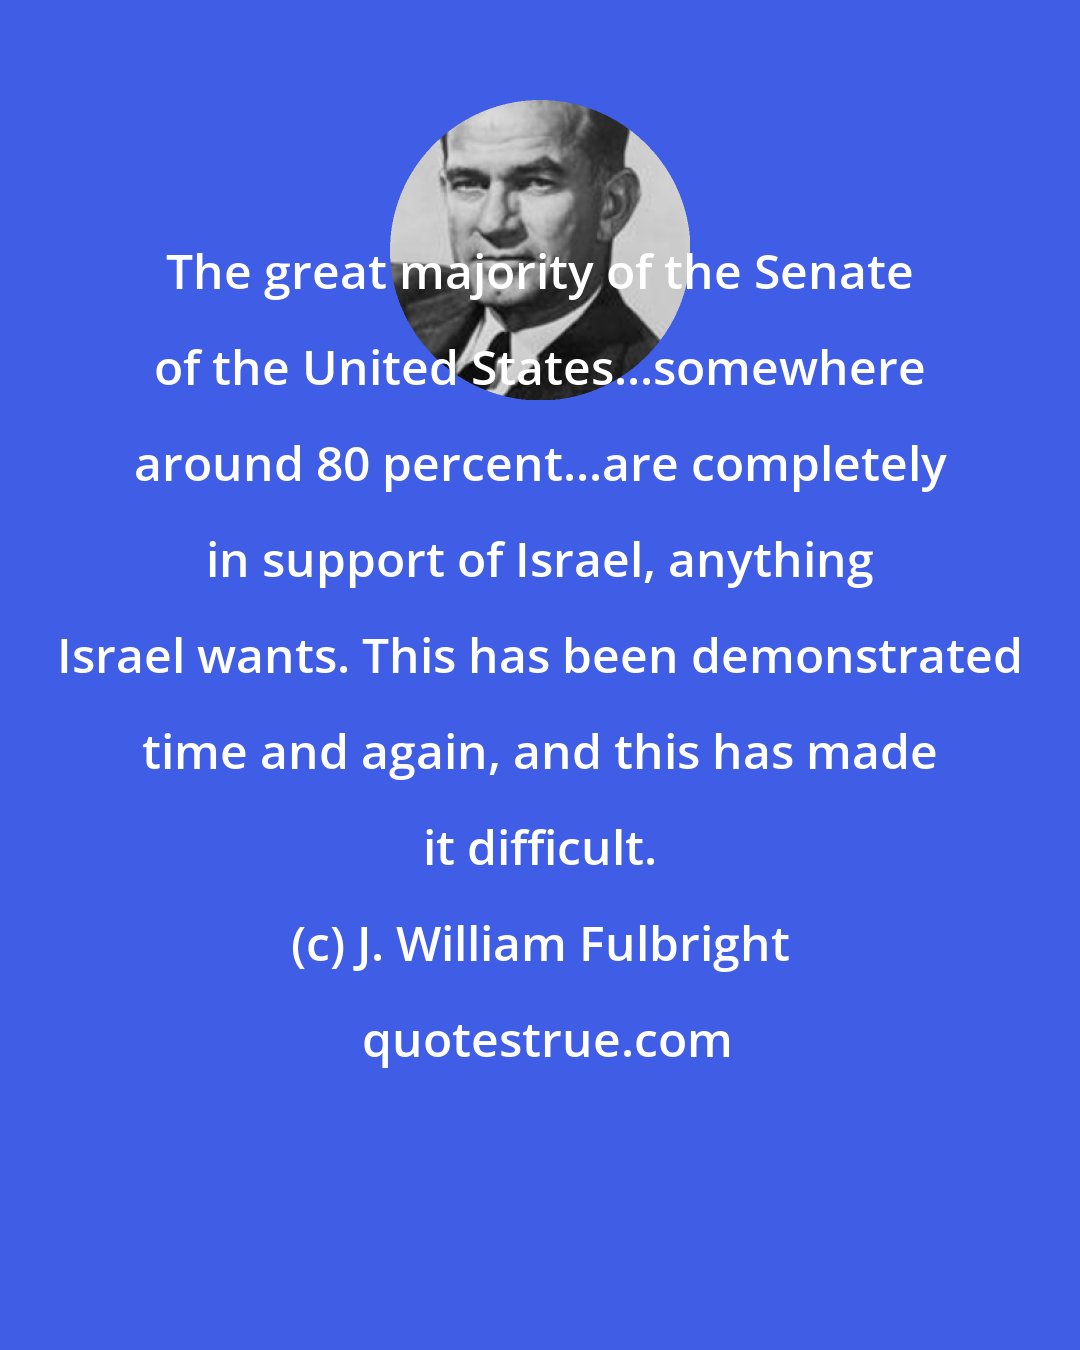 J. William Fulbright: The great majority of the Senate of the United States...somewhere around 80 percent...are completely in support of Israel, anything Israel wants. This has been demonstrated time and again, and this has made it difficult.